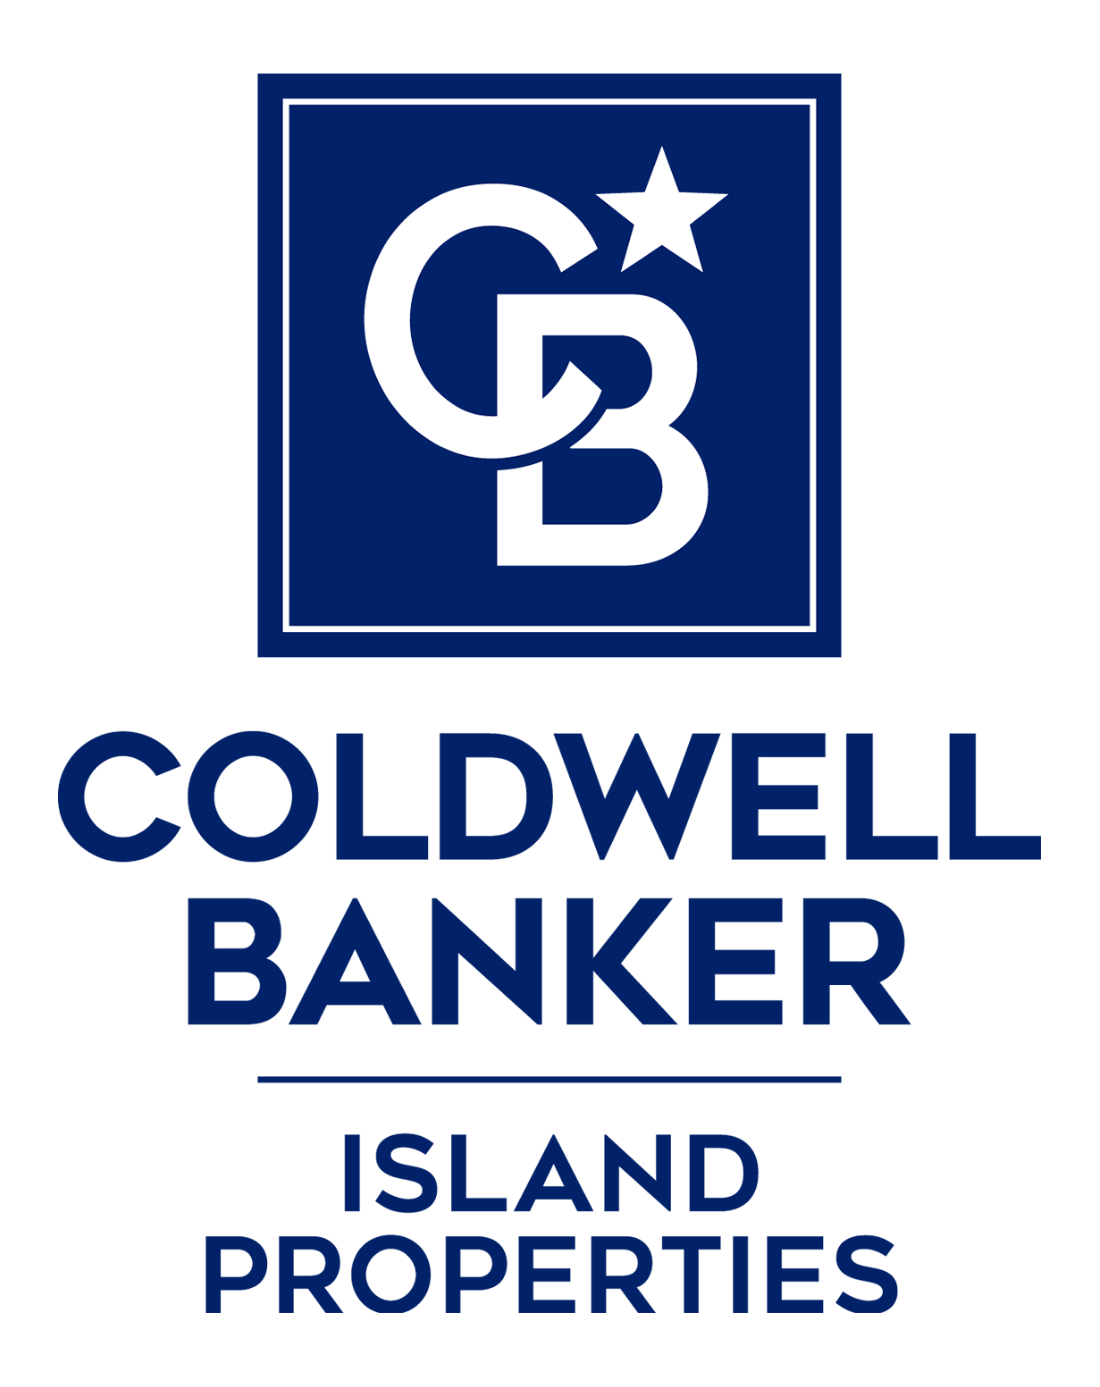 Adrian Fourie - Coldwell Banker Island Properties Logo